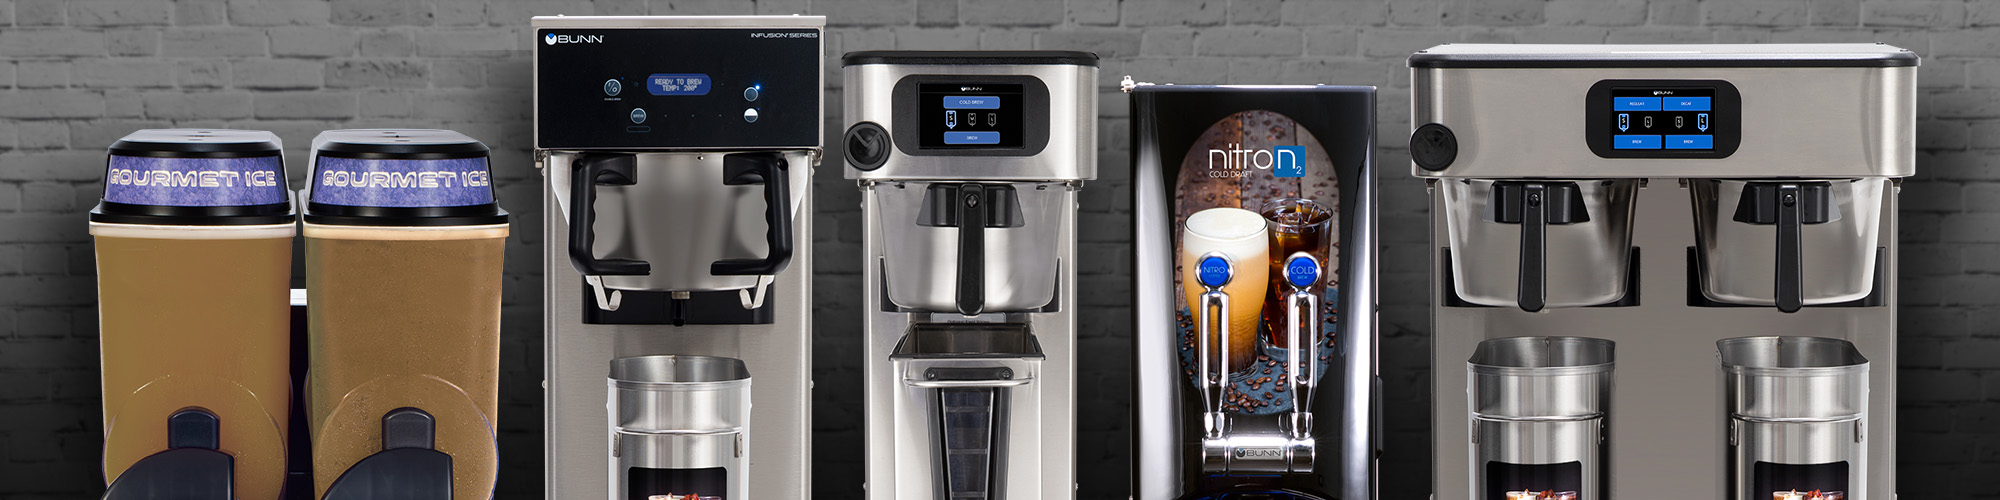 Cold coffee machines